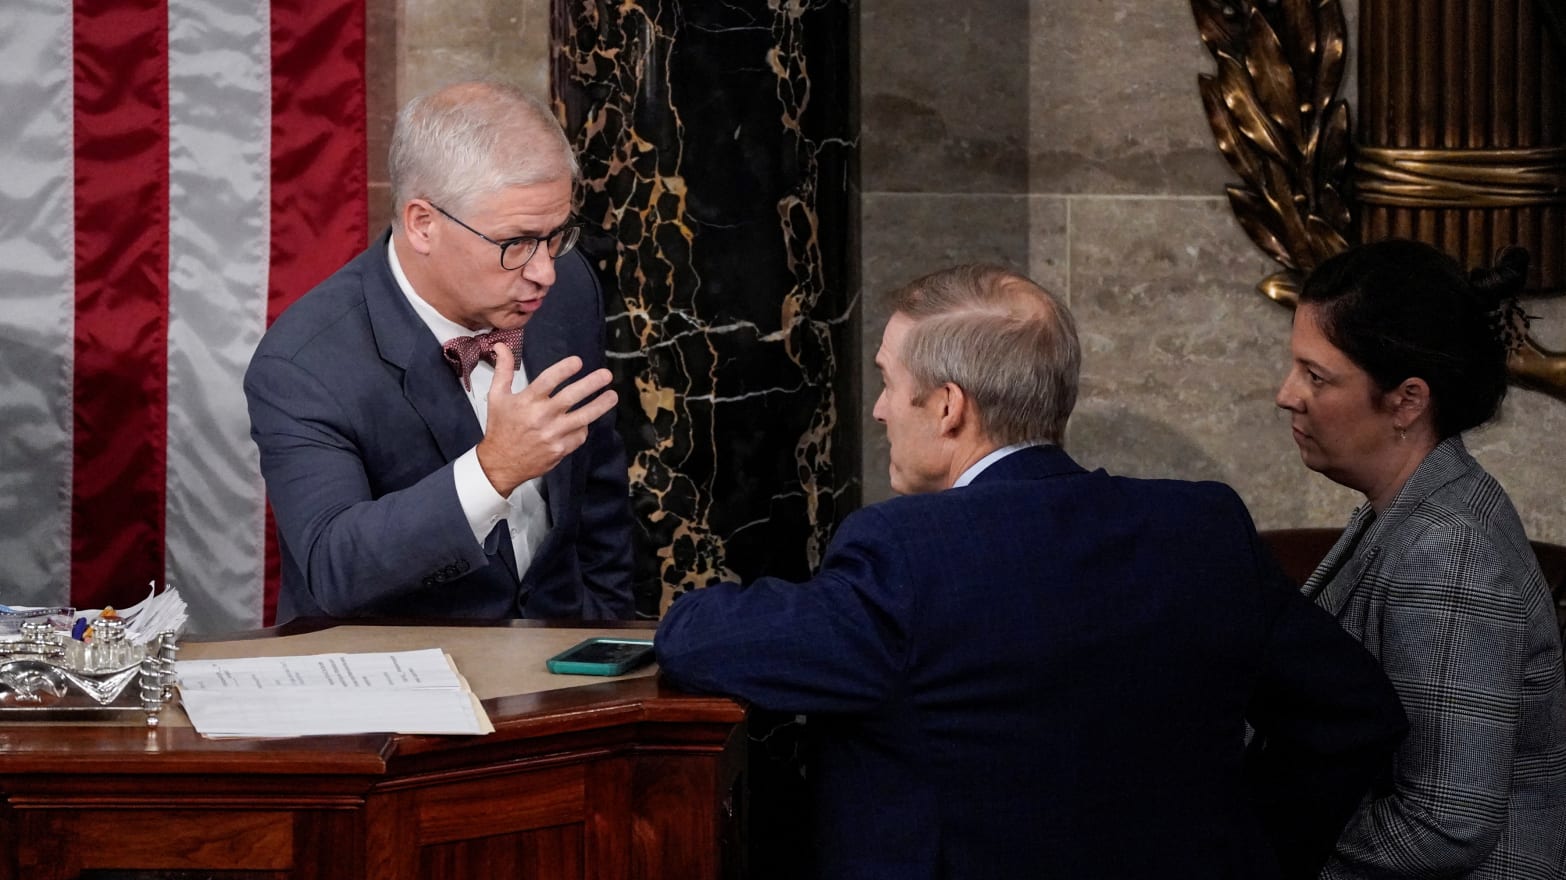 Speaker of the House Pro Tempore Patrick McHenry (R-NC)  talks with U.S. Rep. Jim Jordan (R-OH).